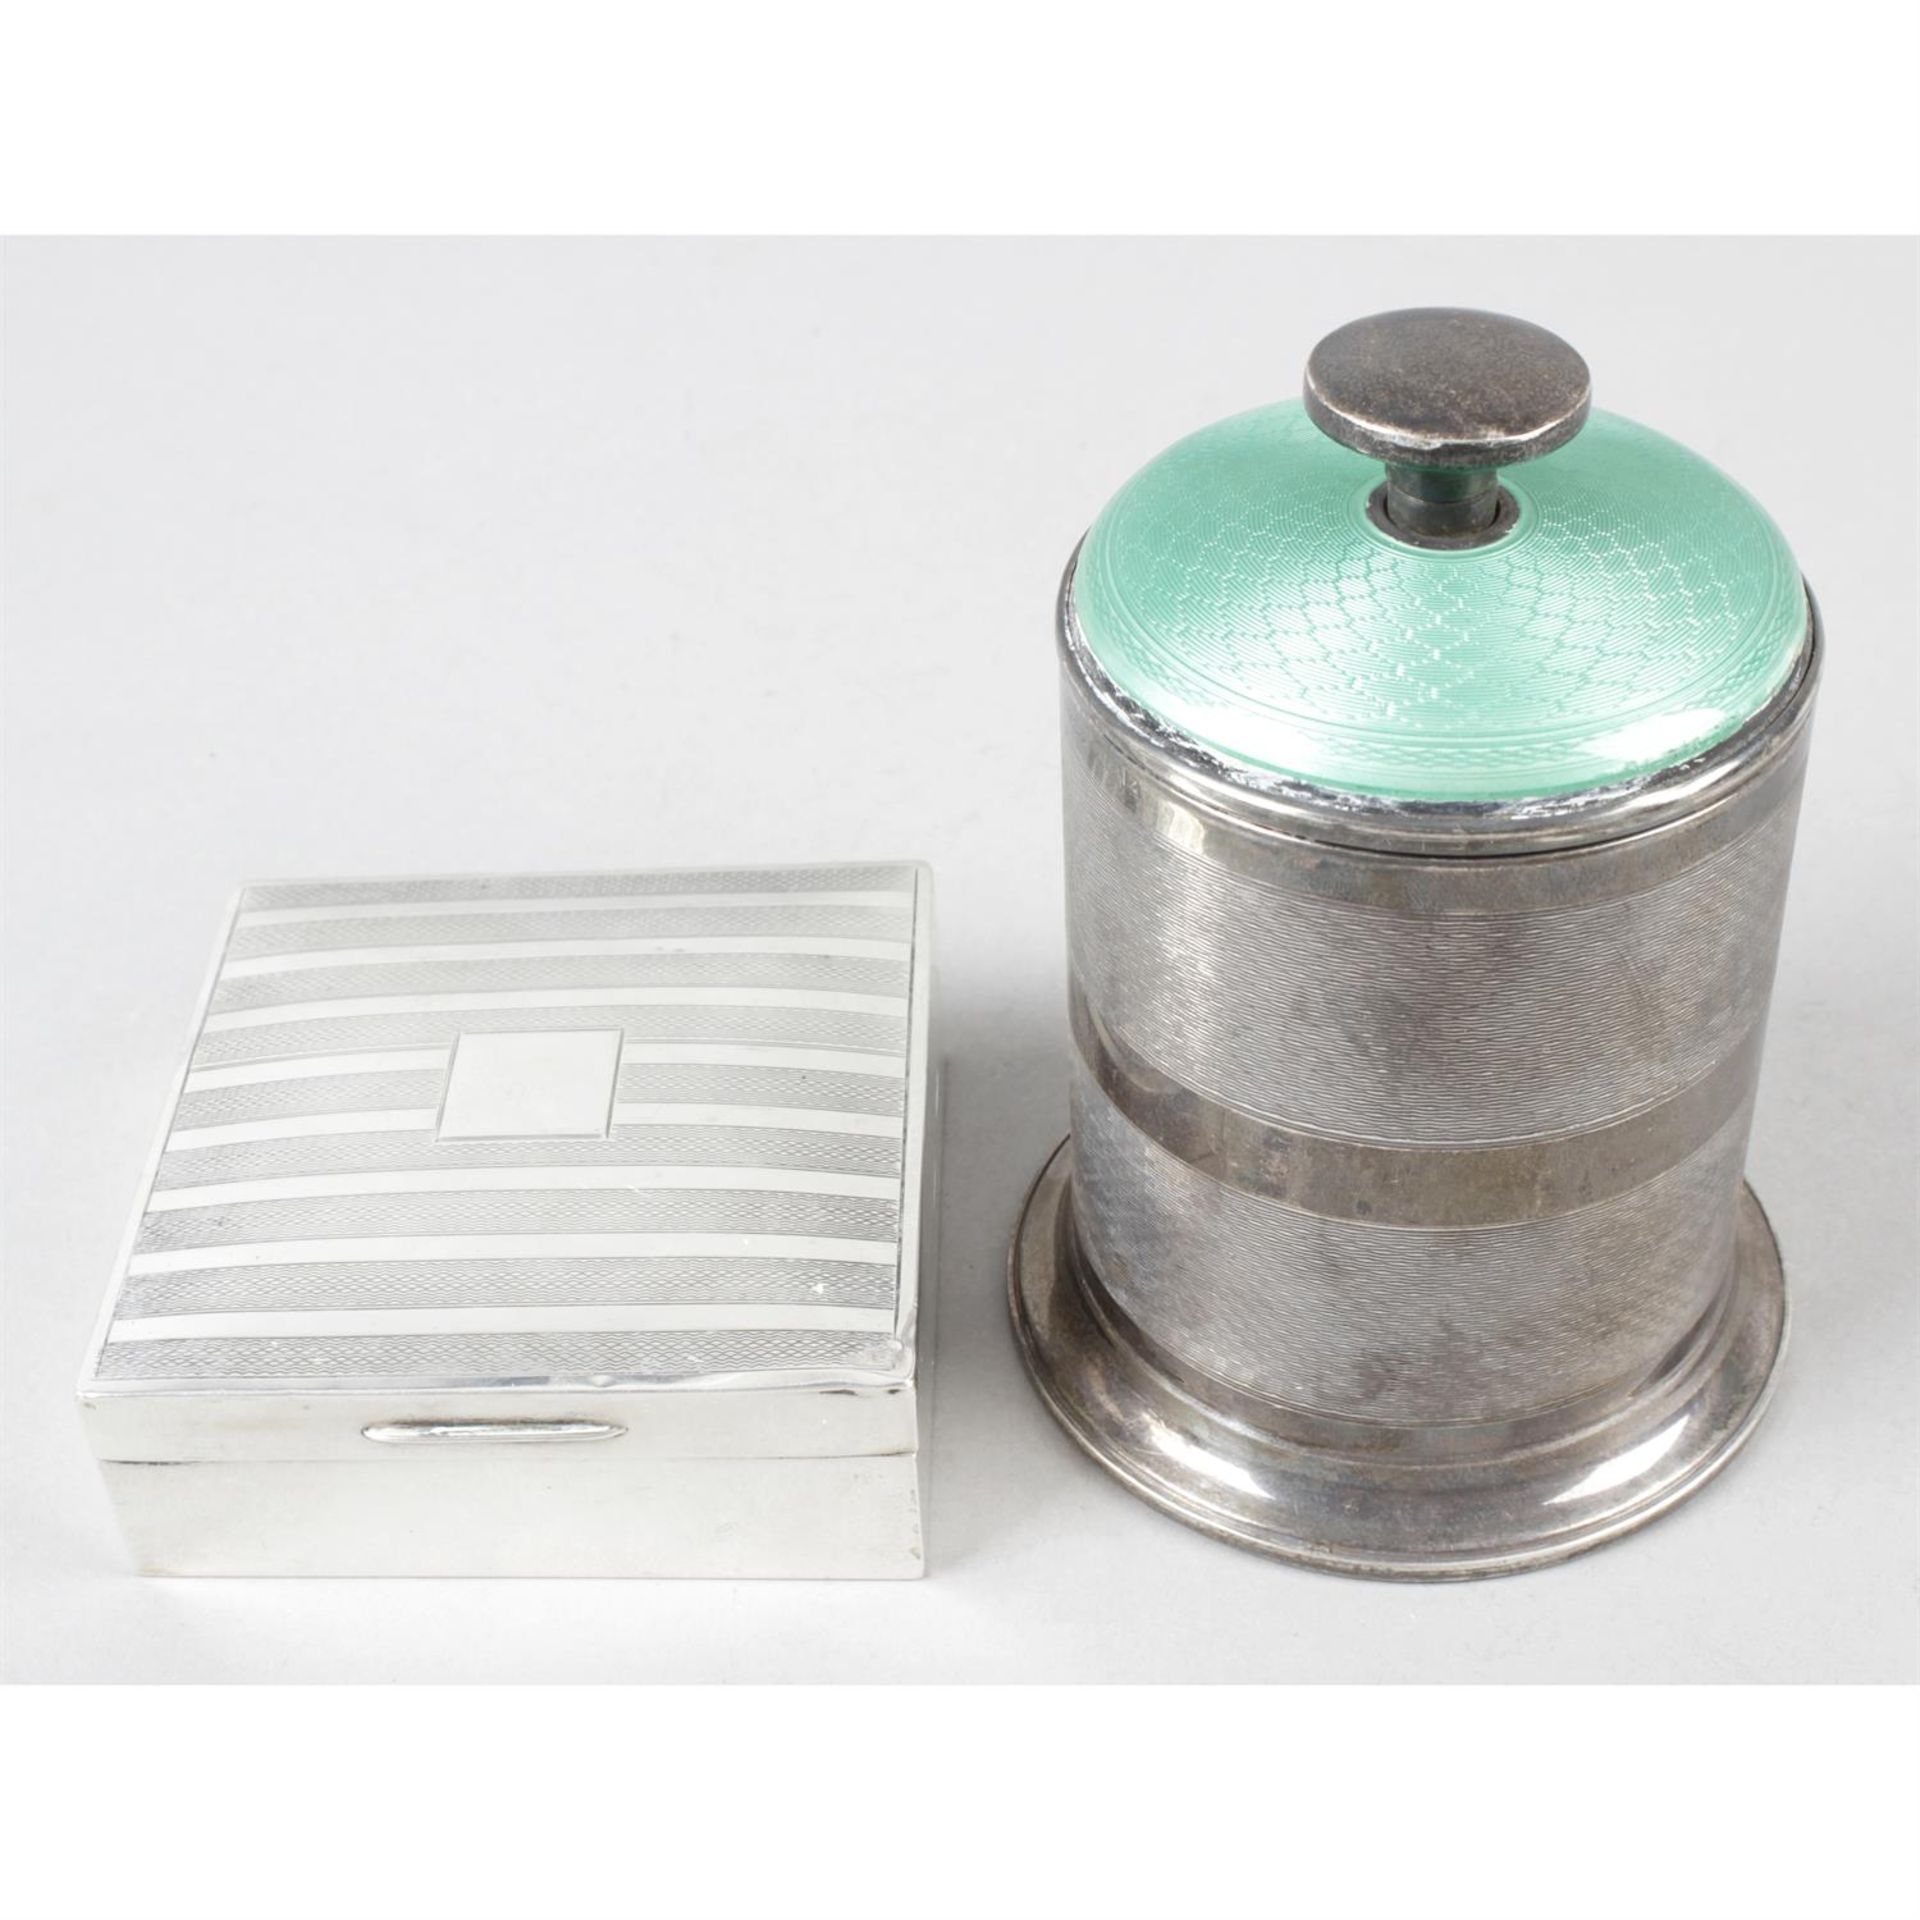 A mid-20th century silver mounted & enamel table cigarette dispenser, together with a small silver